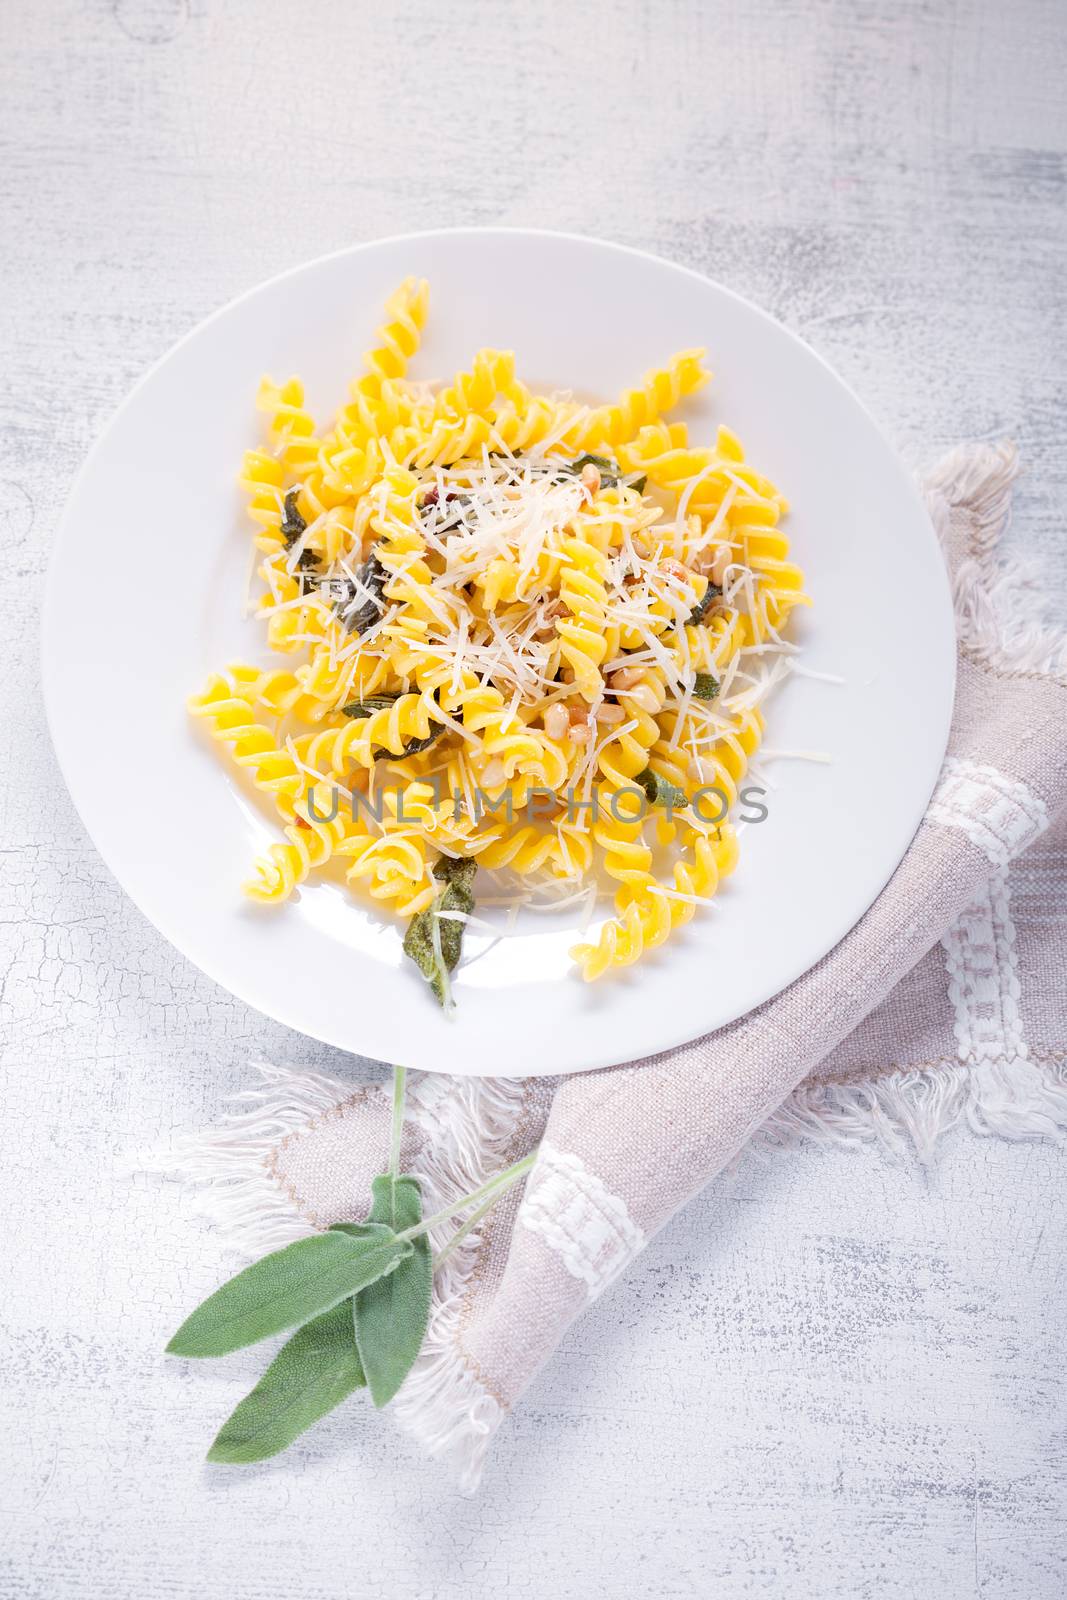 Fusilli pasta with sage and pine nuts. Gluten free. Flour from rice and corn flour